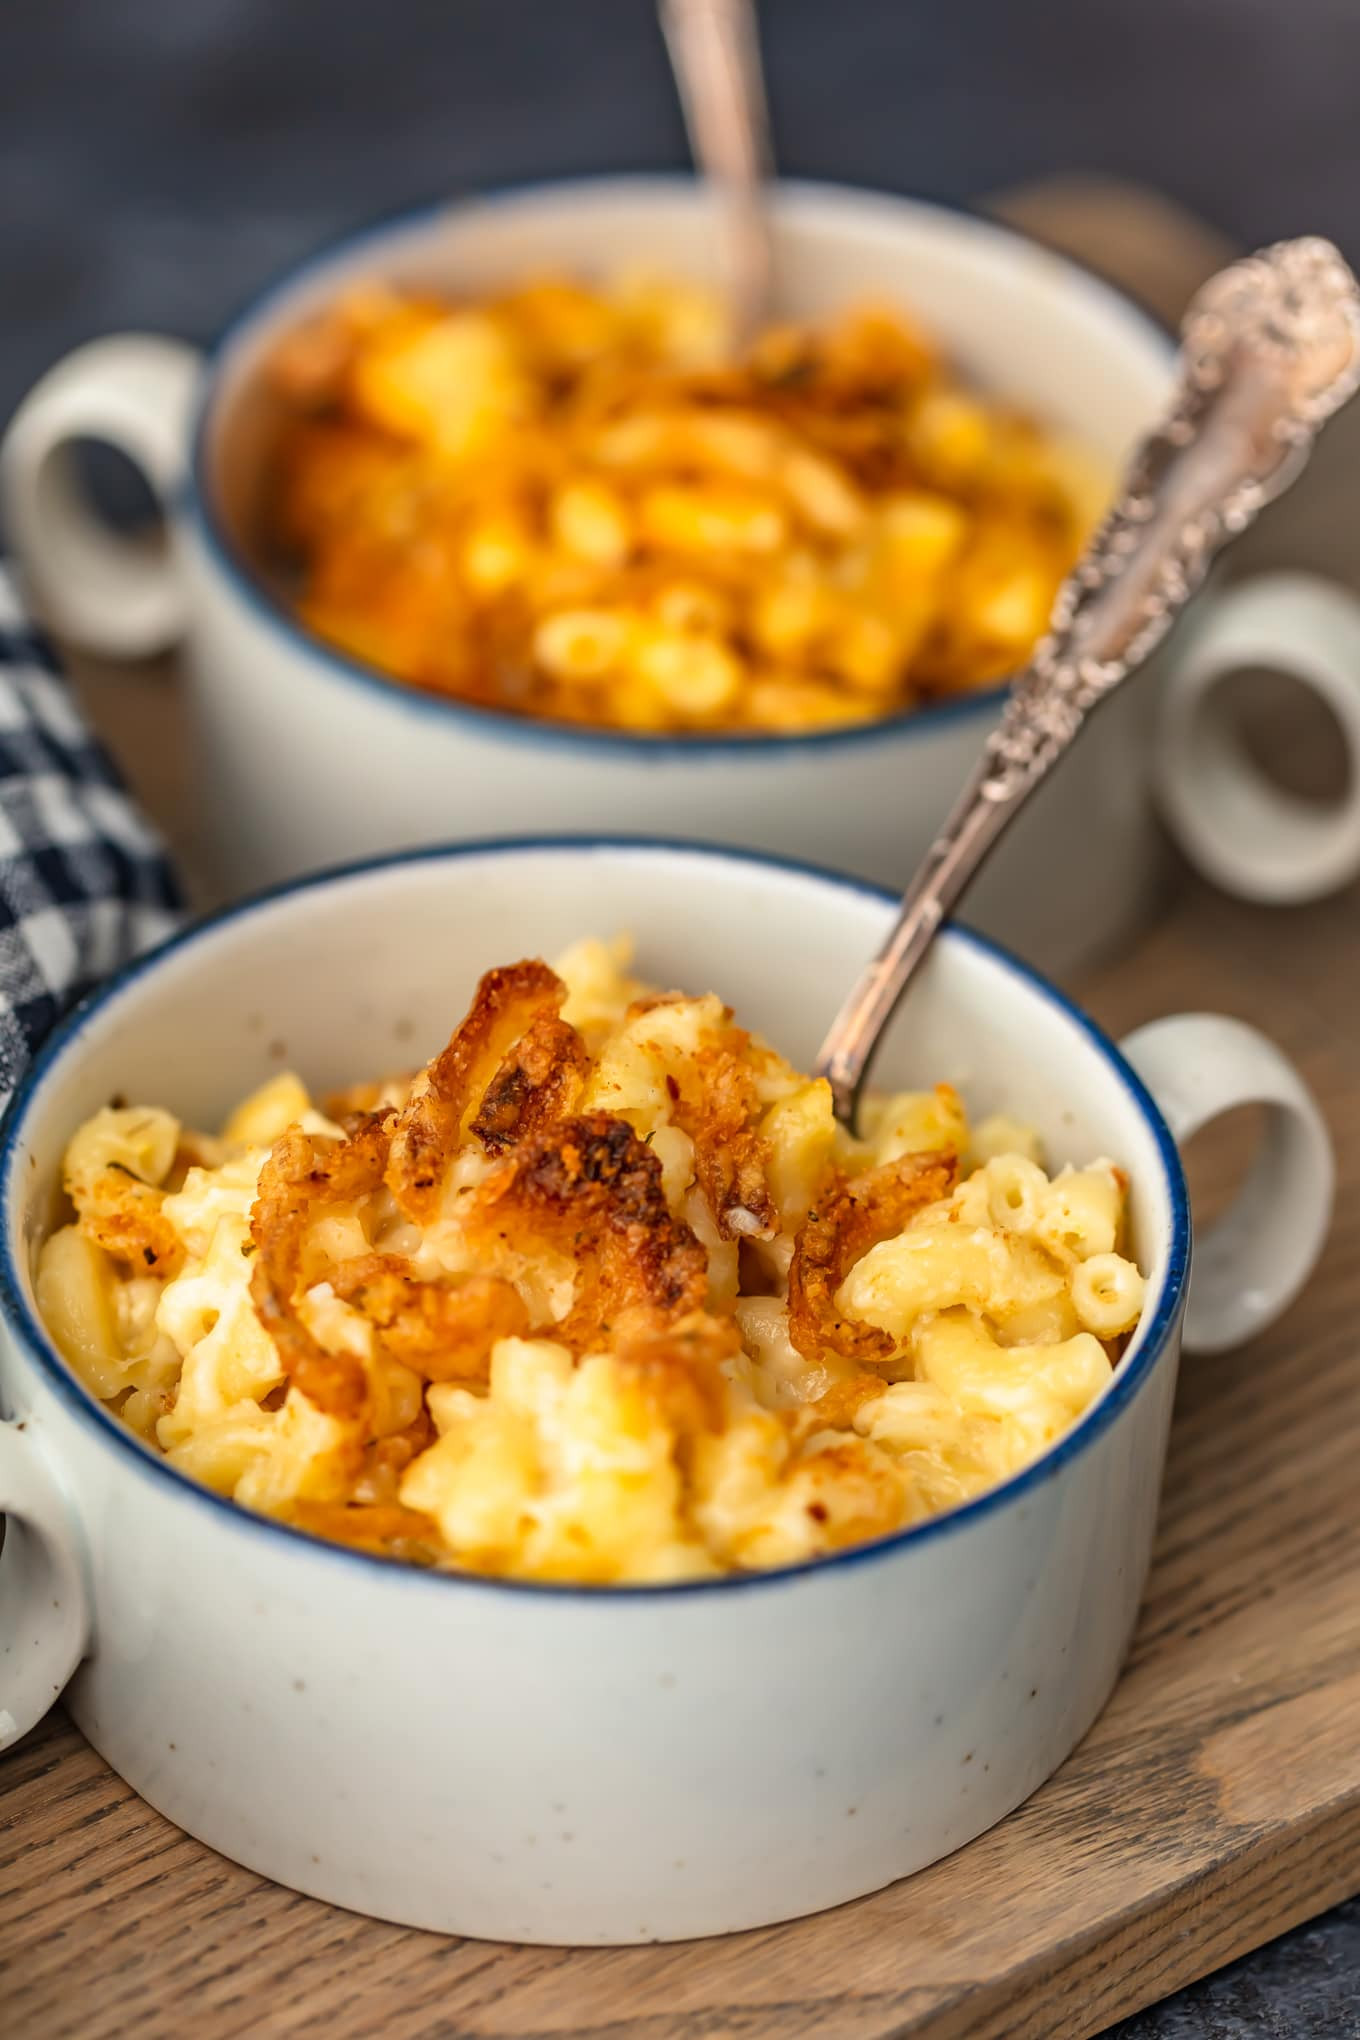 Make Baked Macaroni And Cheese
 Baked Mac and Cheese Recipe 2 Ways VIDEO The Cookie Rookie